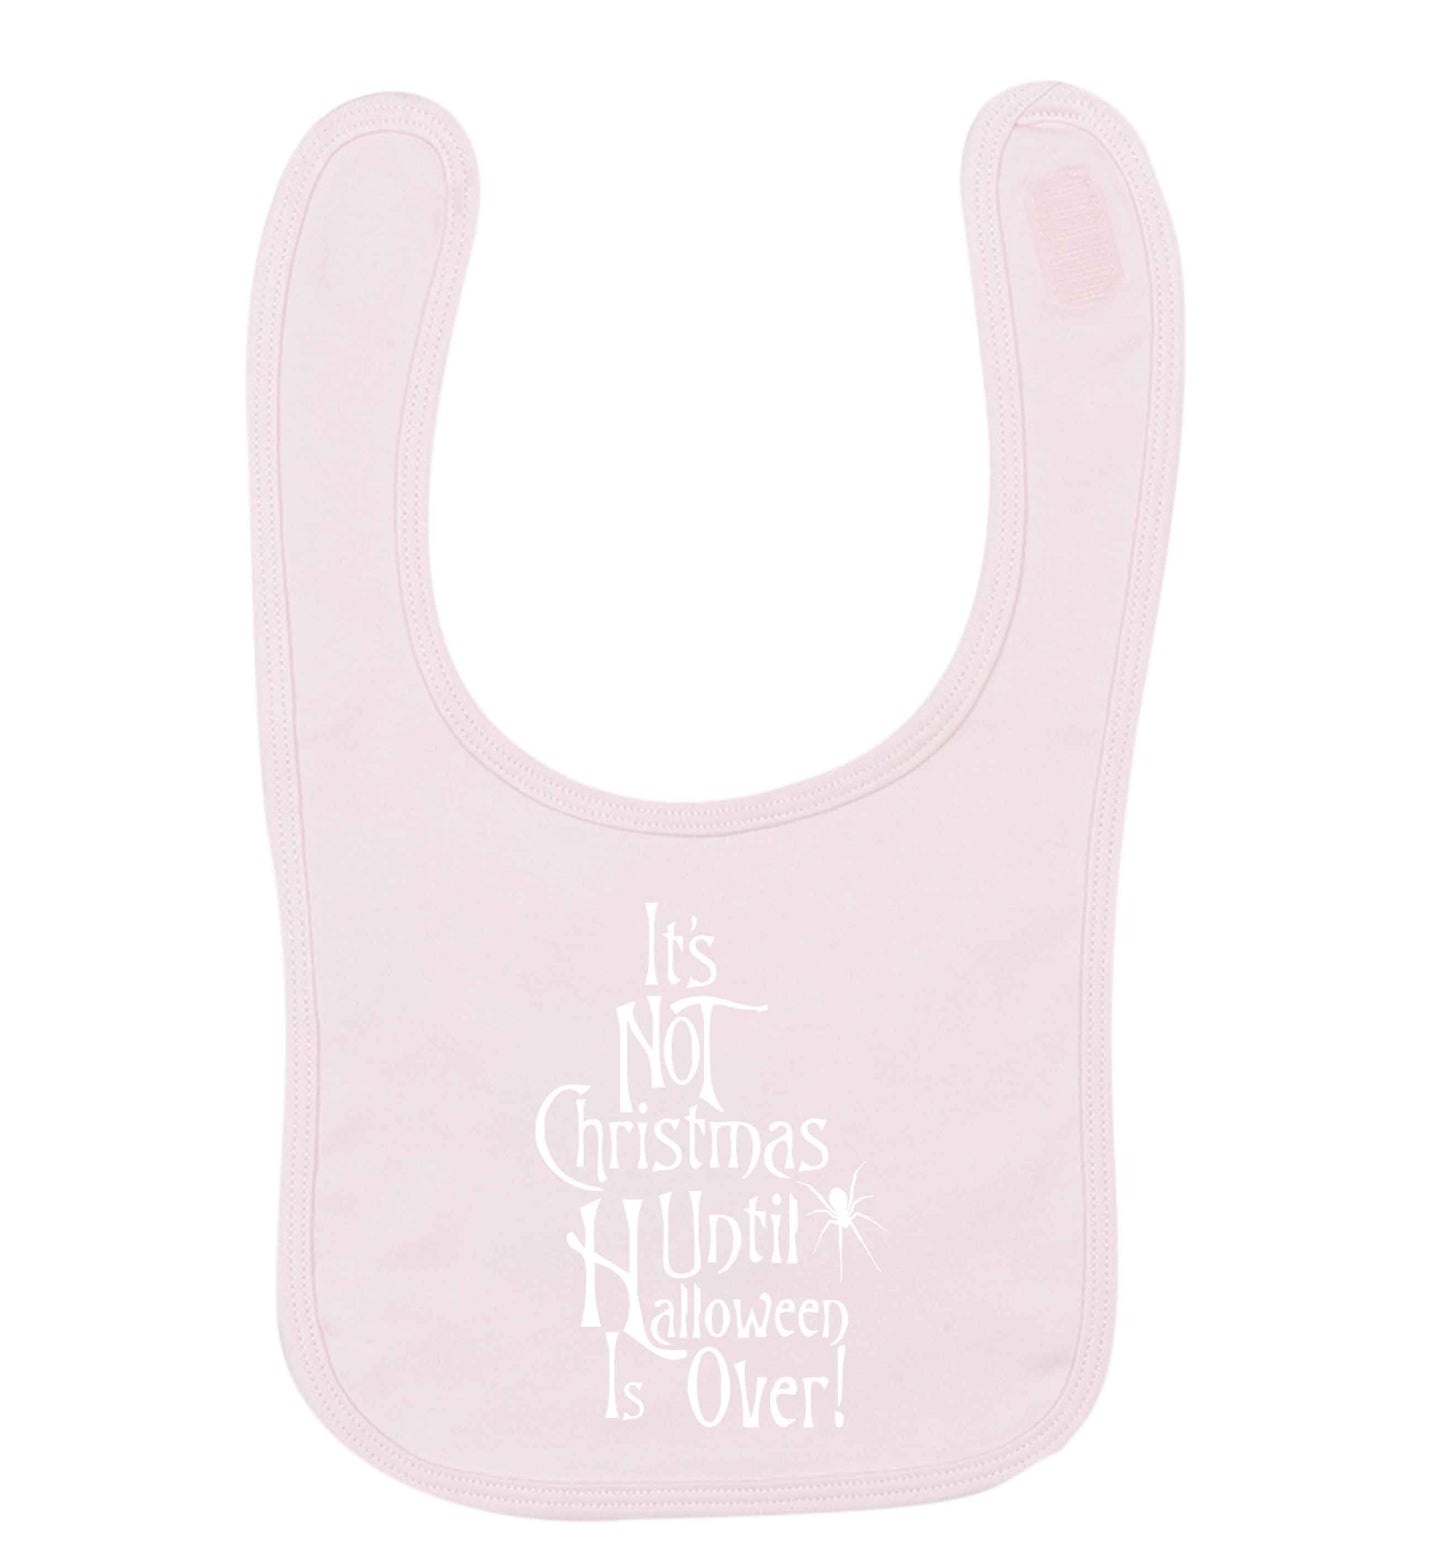 It's not Christmas until Halloween is over pale pink baby bib